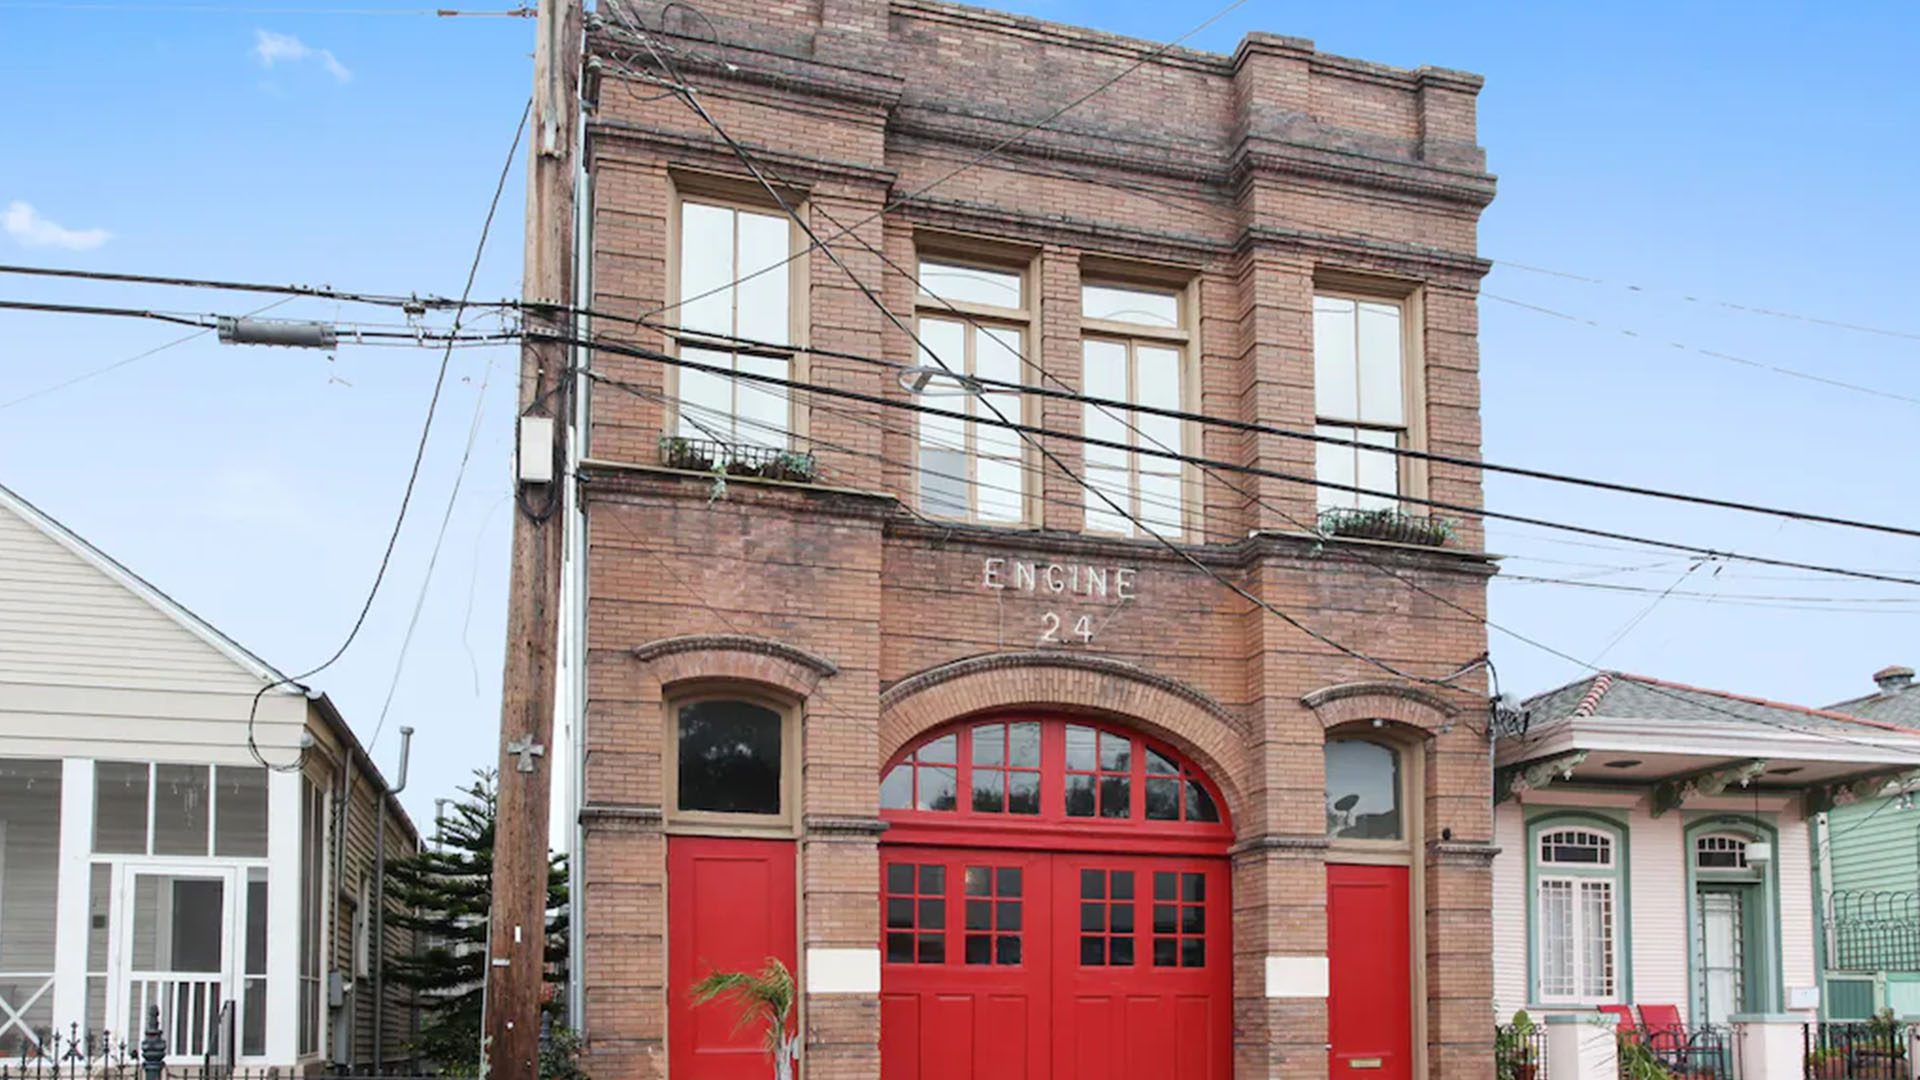 Engine 24 French Quarter Firehouse - New Orleans, Louisiana